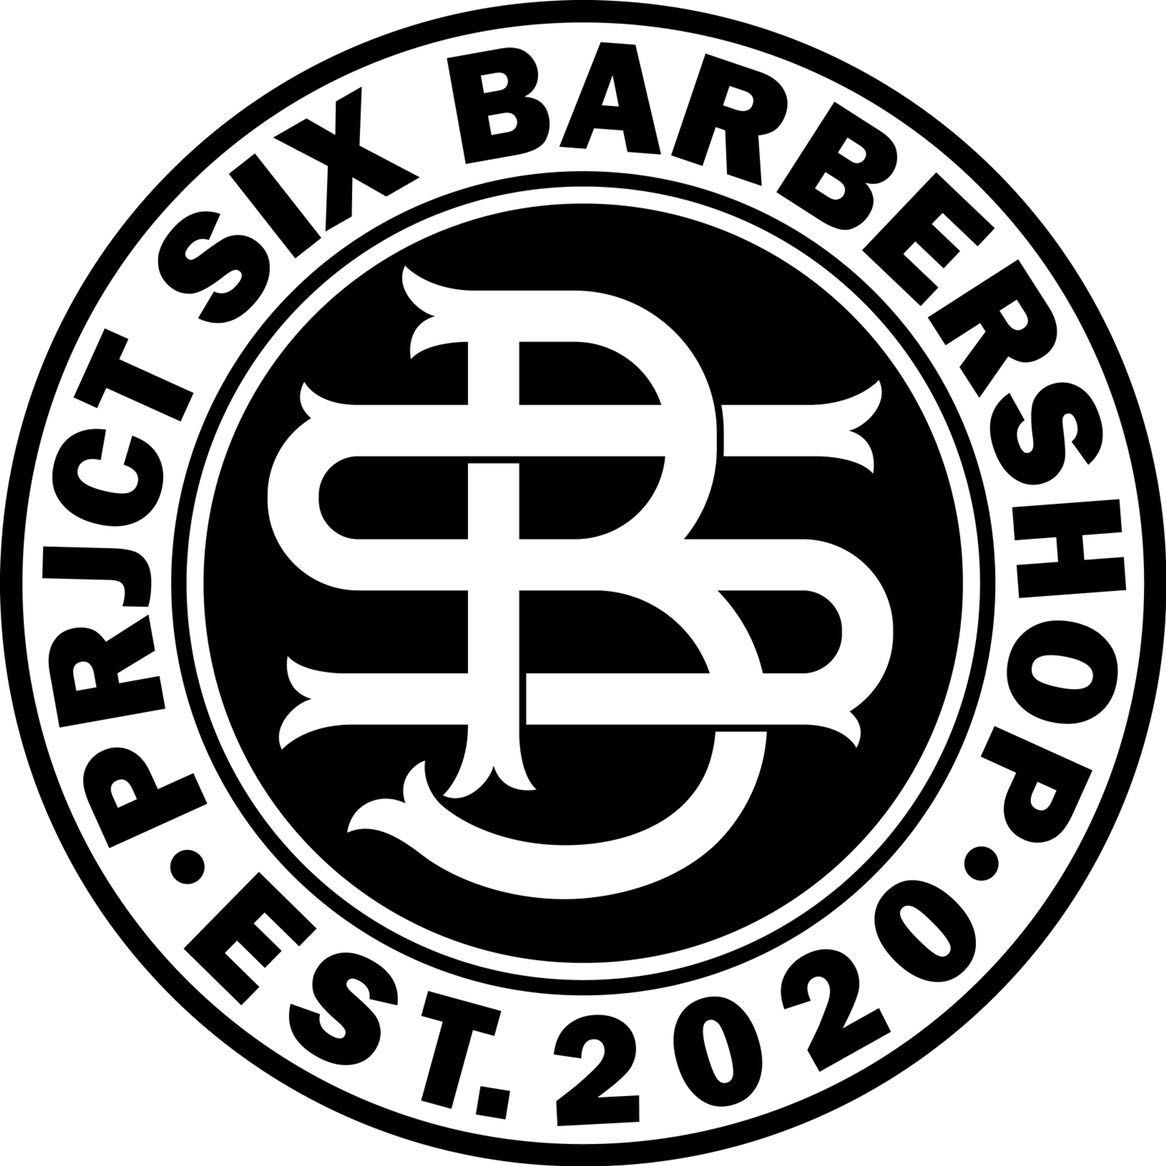 Barber_Hgb, 4145 Ming Ave, Bakersfield, 93309